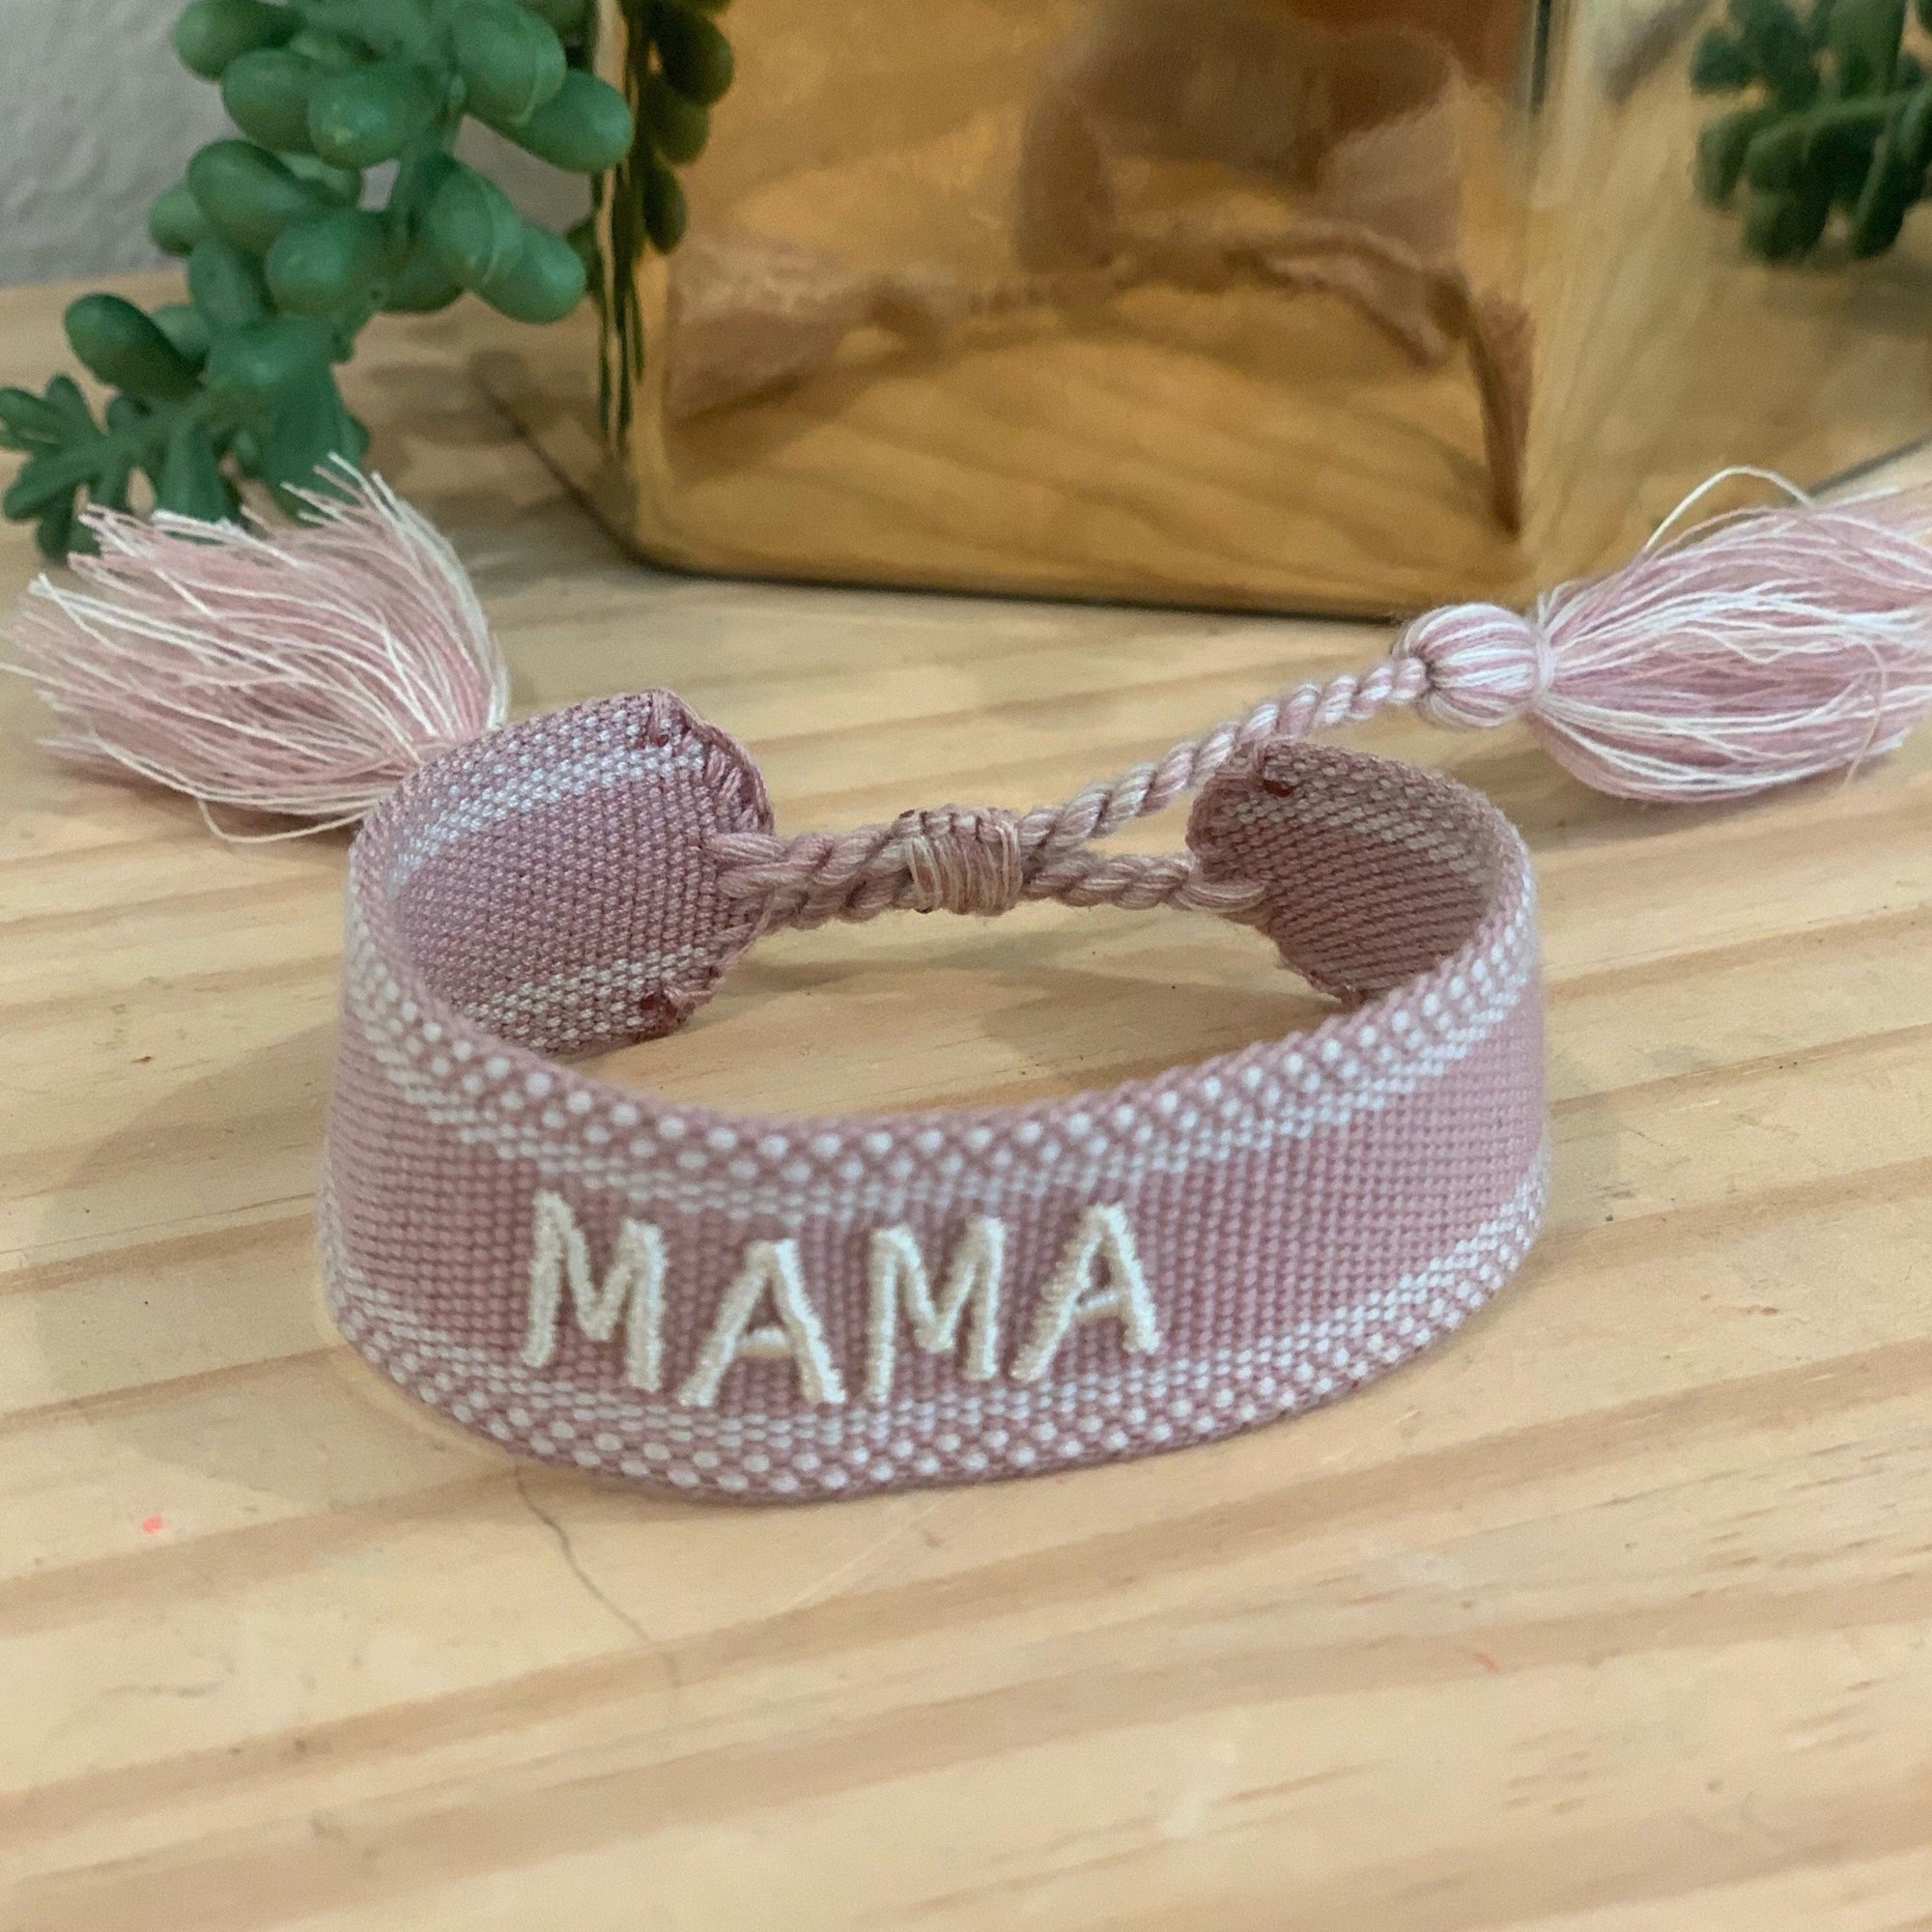 MAMA embroidered friendship bracelet in mauve